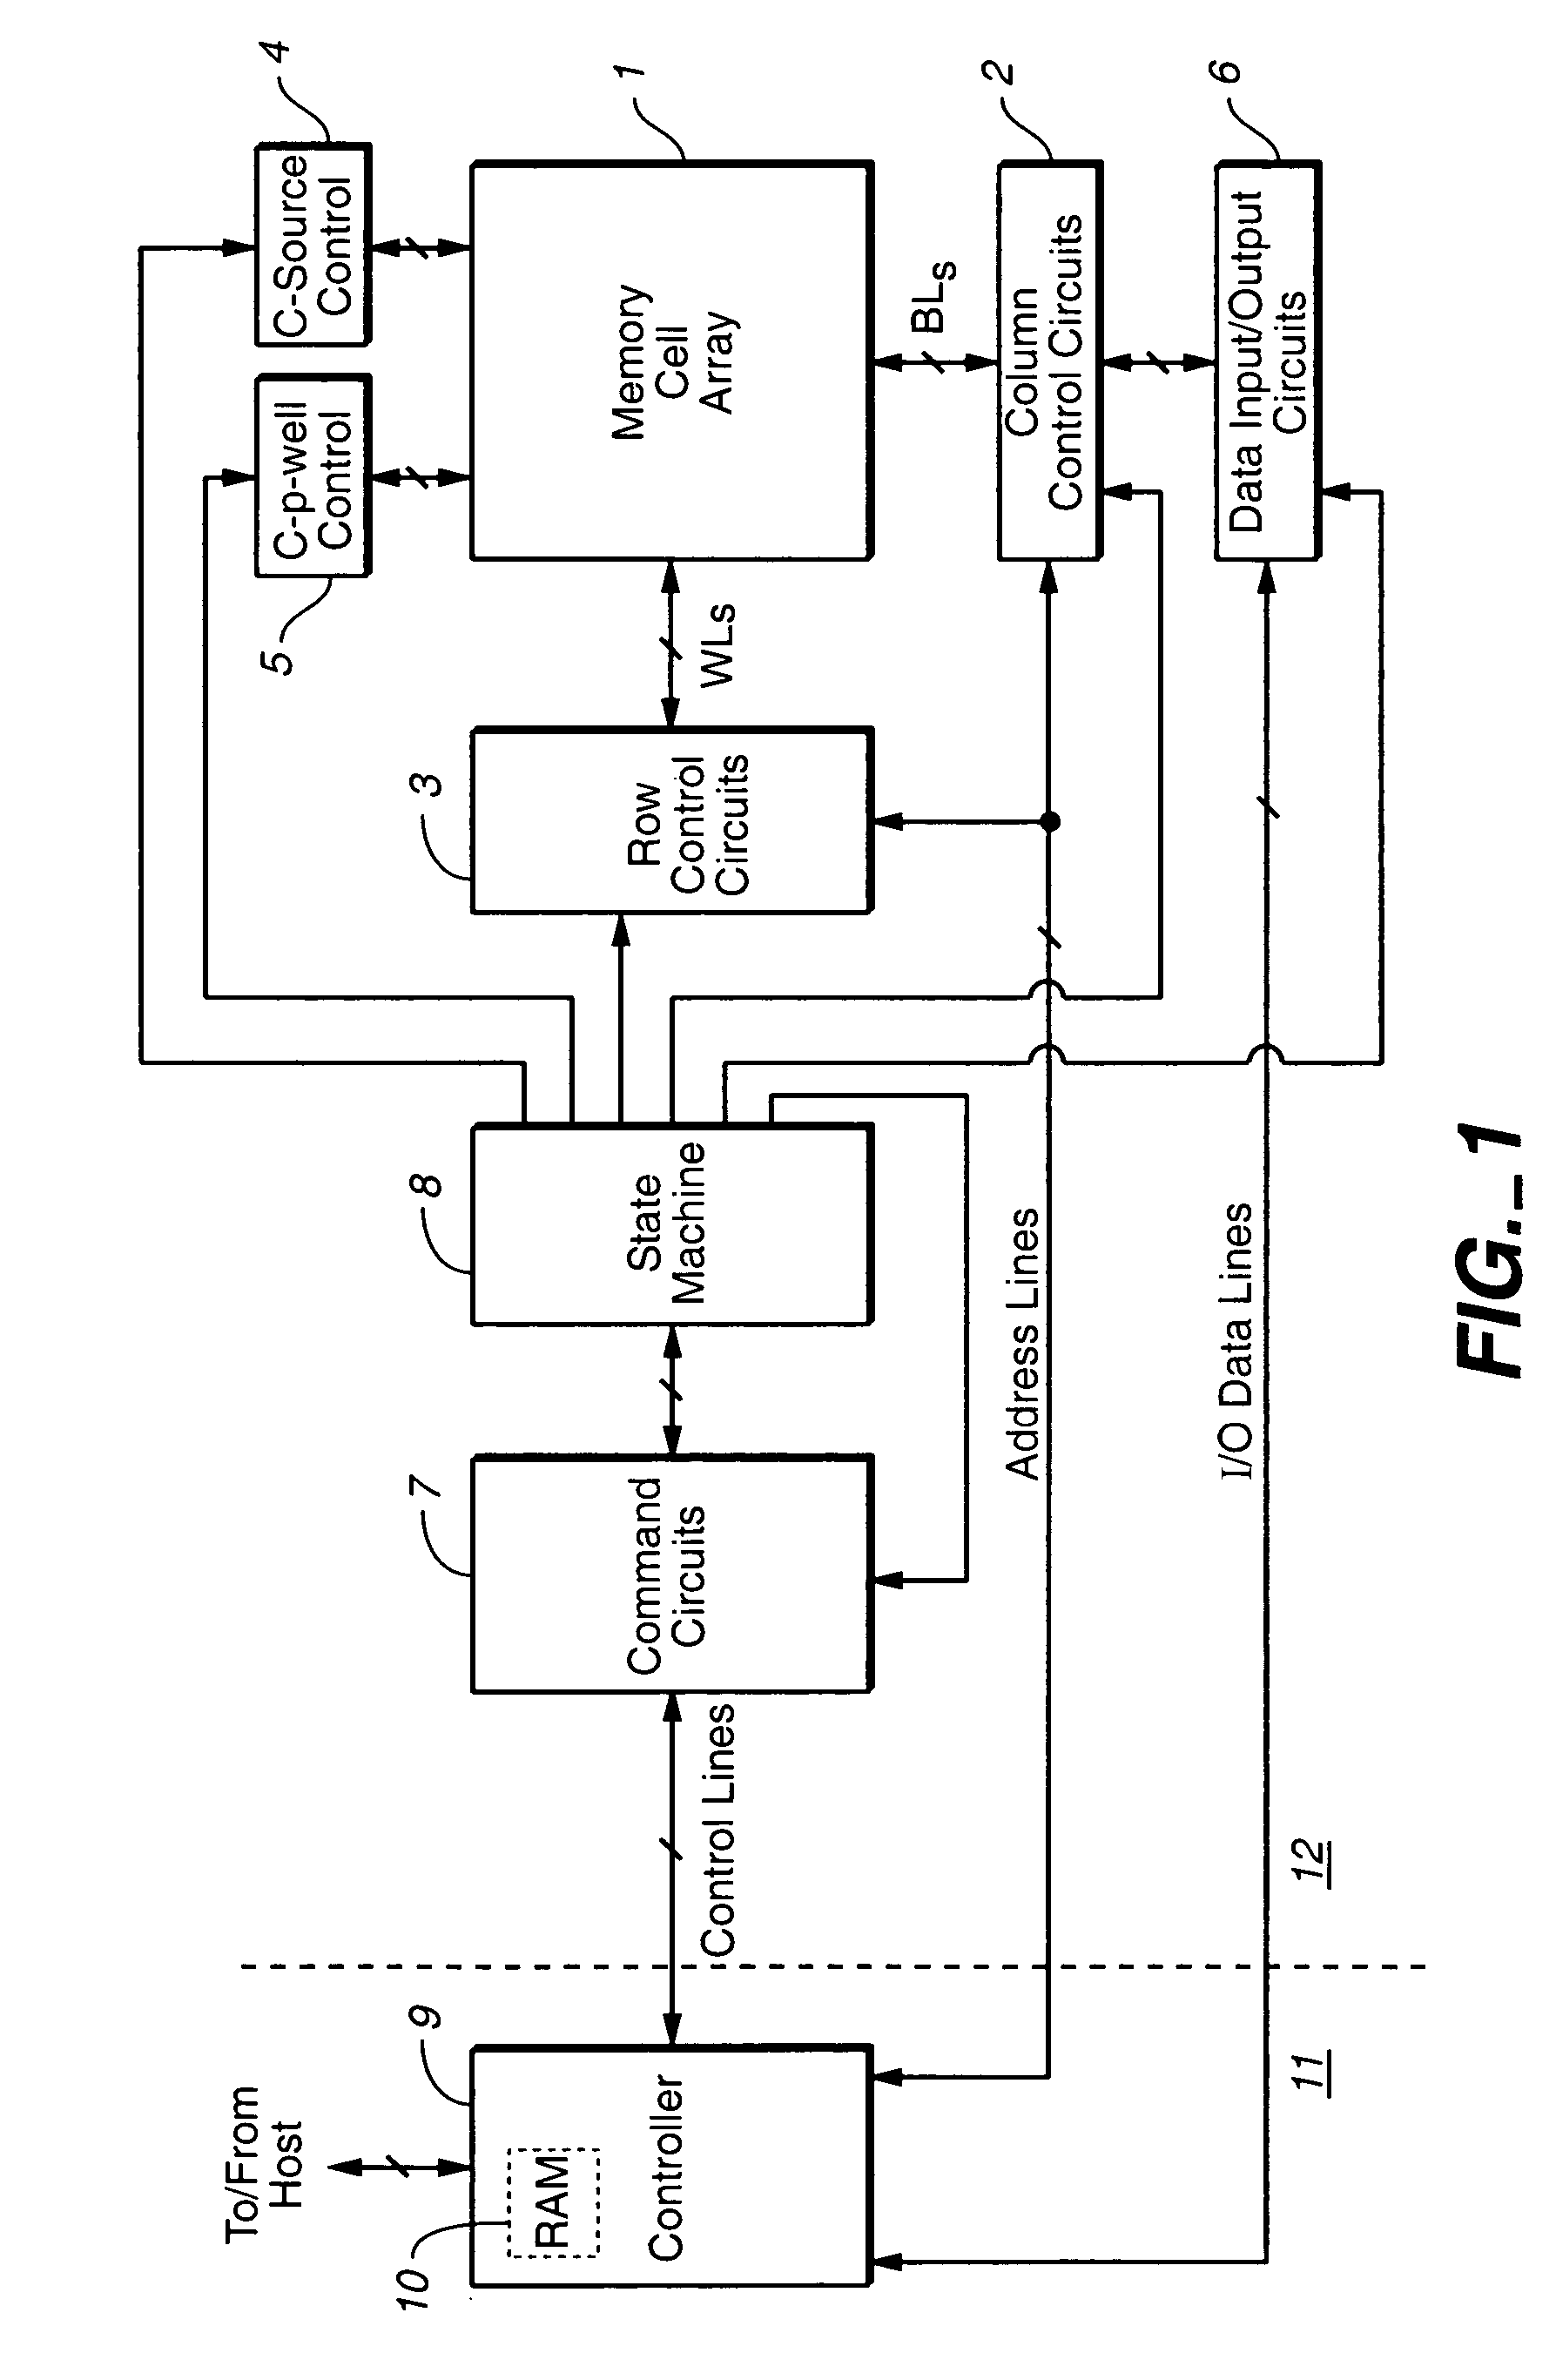 Flash memory cell arrays having dual control gates per memory cell charge storage element